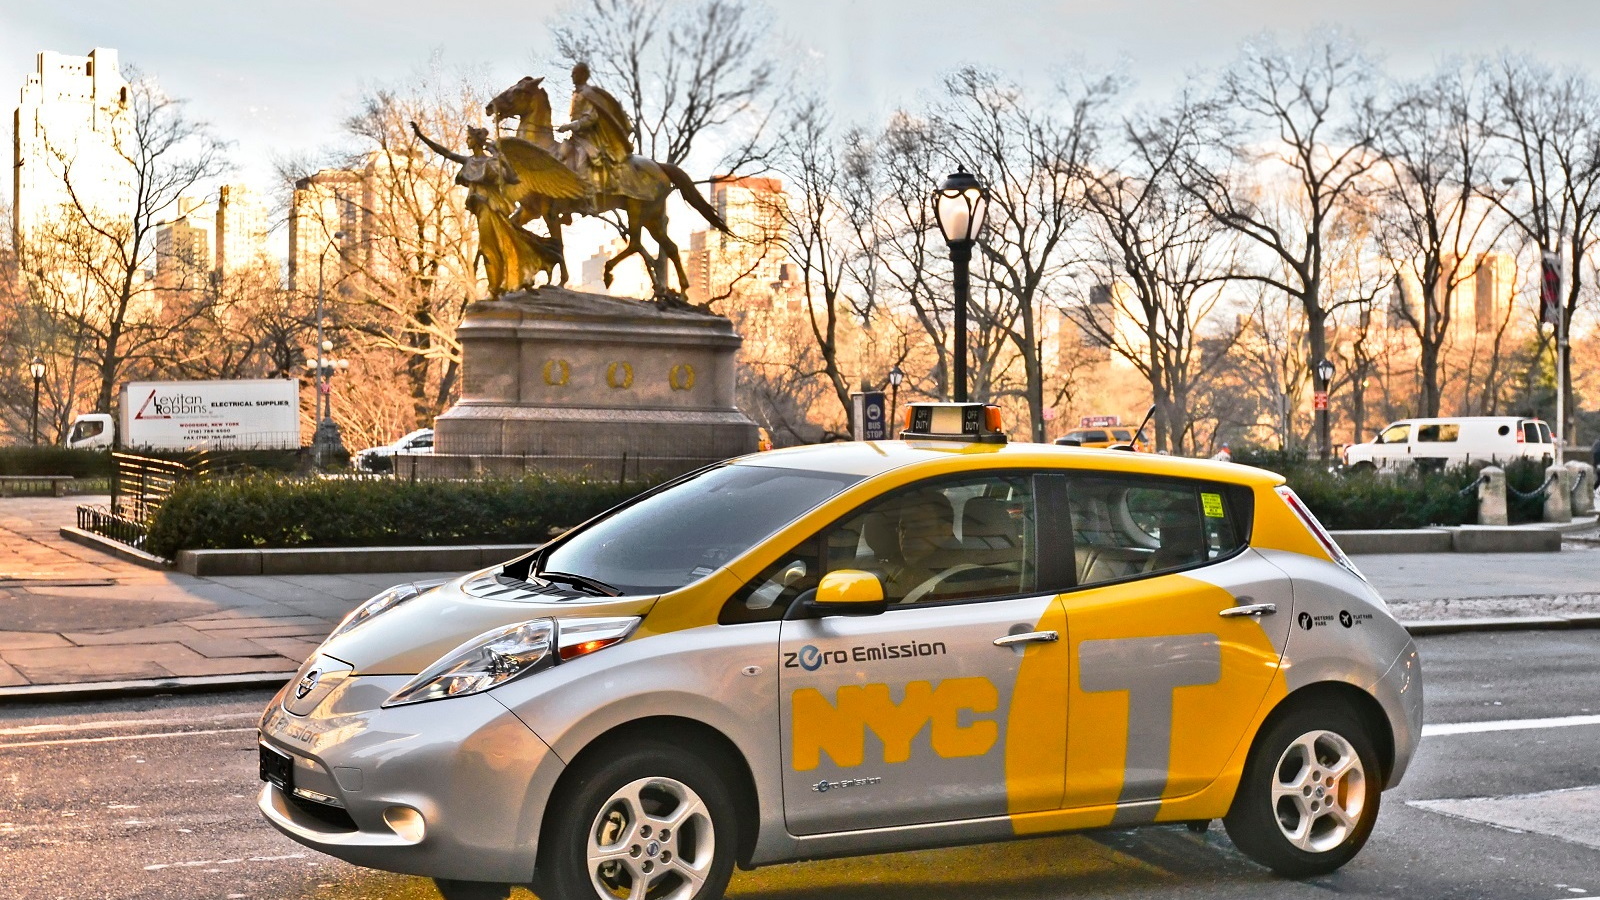 2013 Nissan Leaf electric car tested as taxi in New York City, April 2013